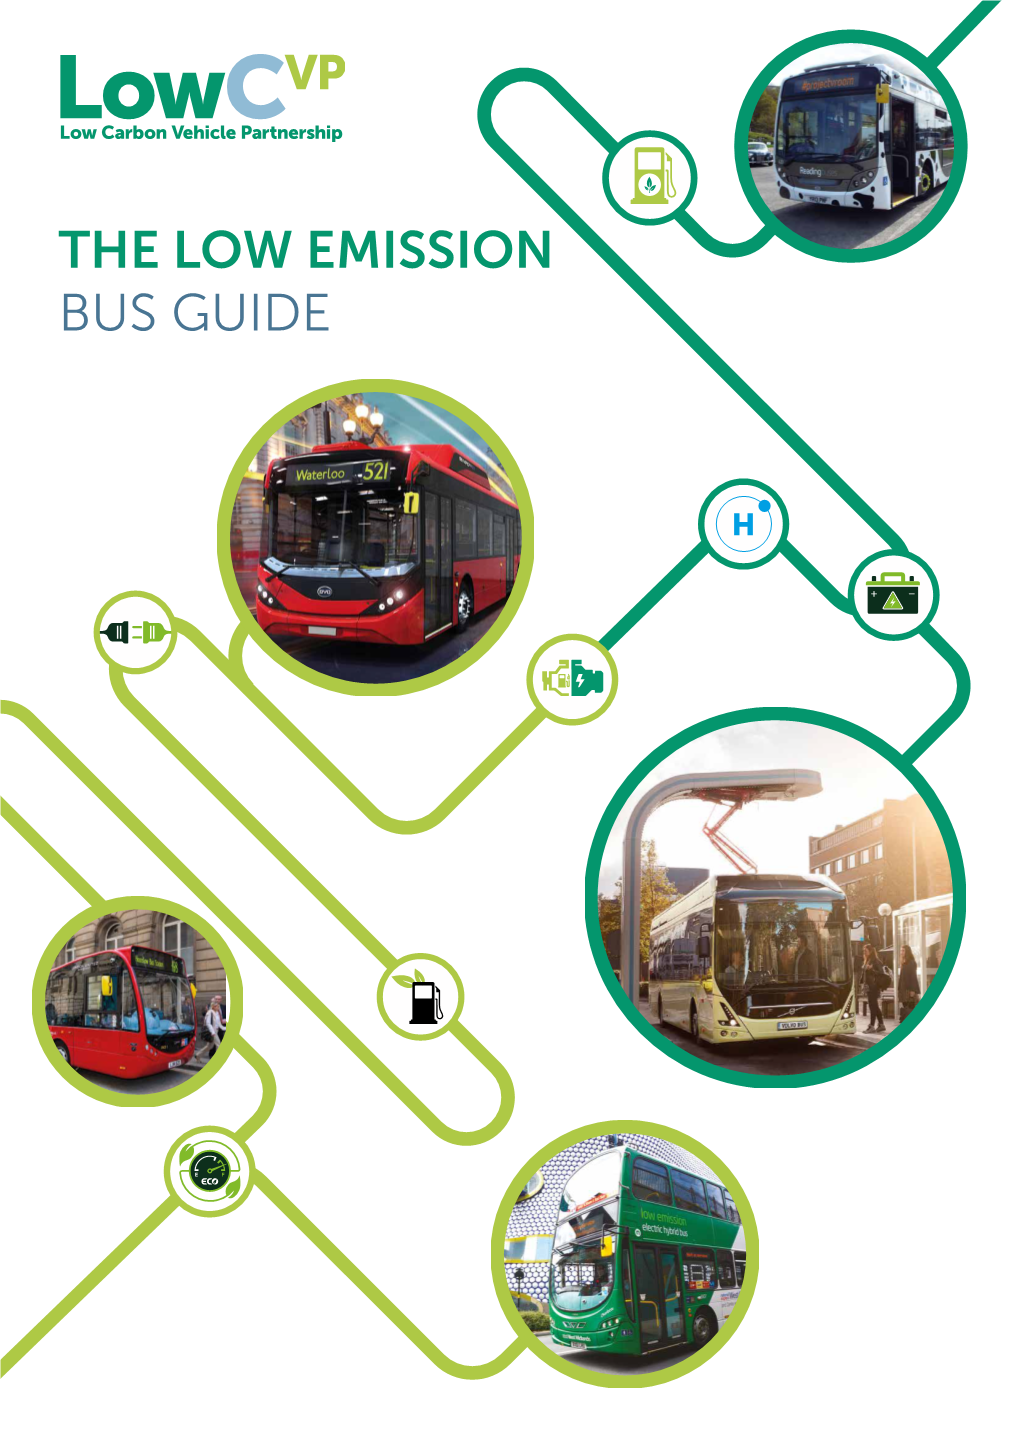 The Low Emission Bus Guide